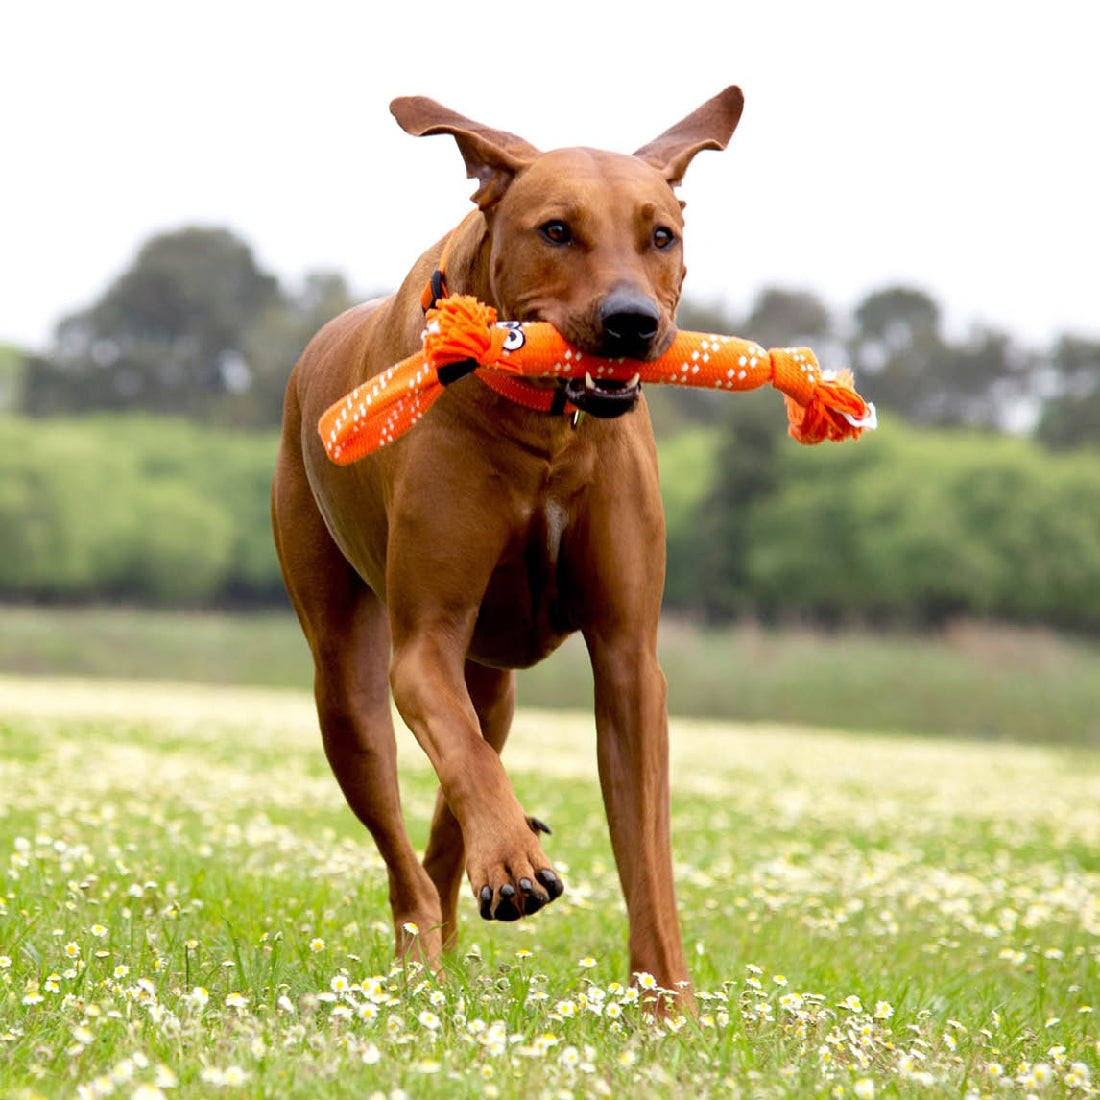 Dog running with a Rogz toy in mouth through field.